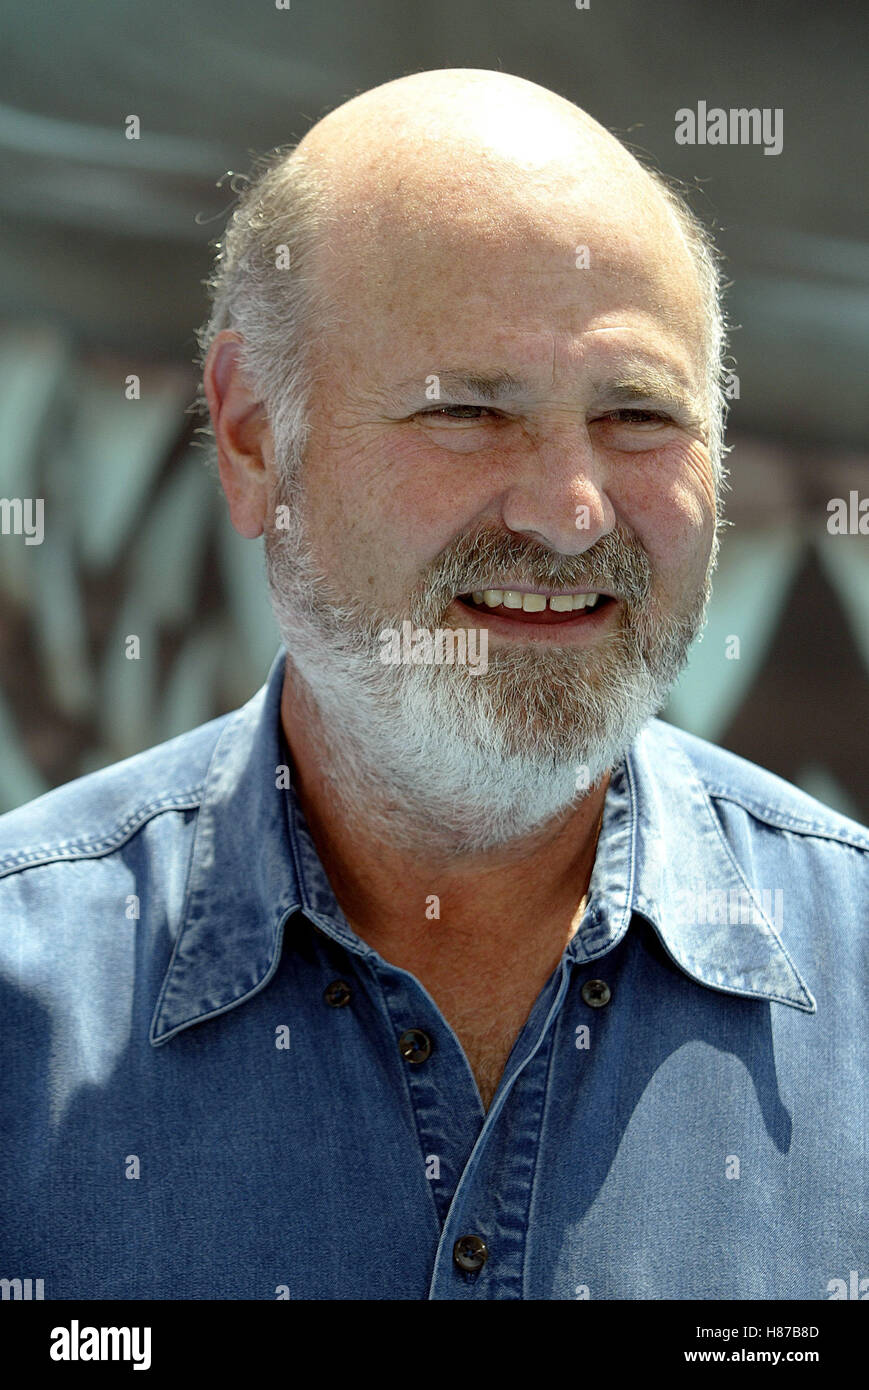 ROB REINER FINDING NEMO WORLD PREMIERE HOLLYWOOD LOS ANGELES USA 18 May 2003 Stock Photo